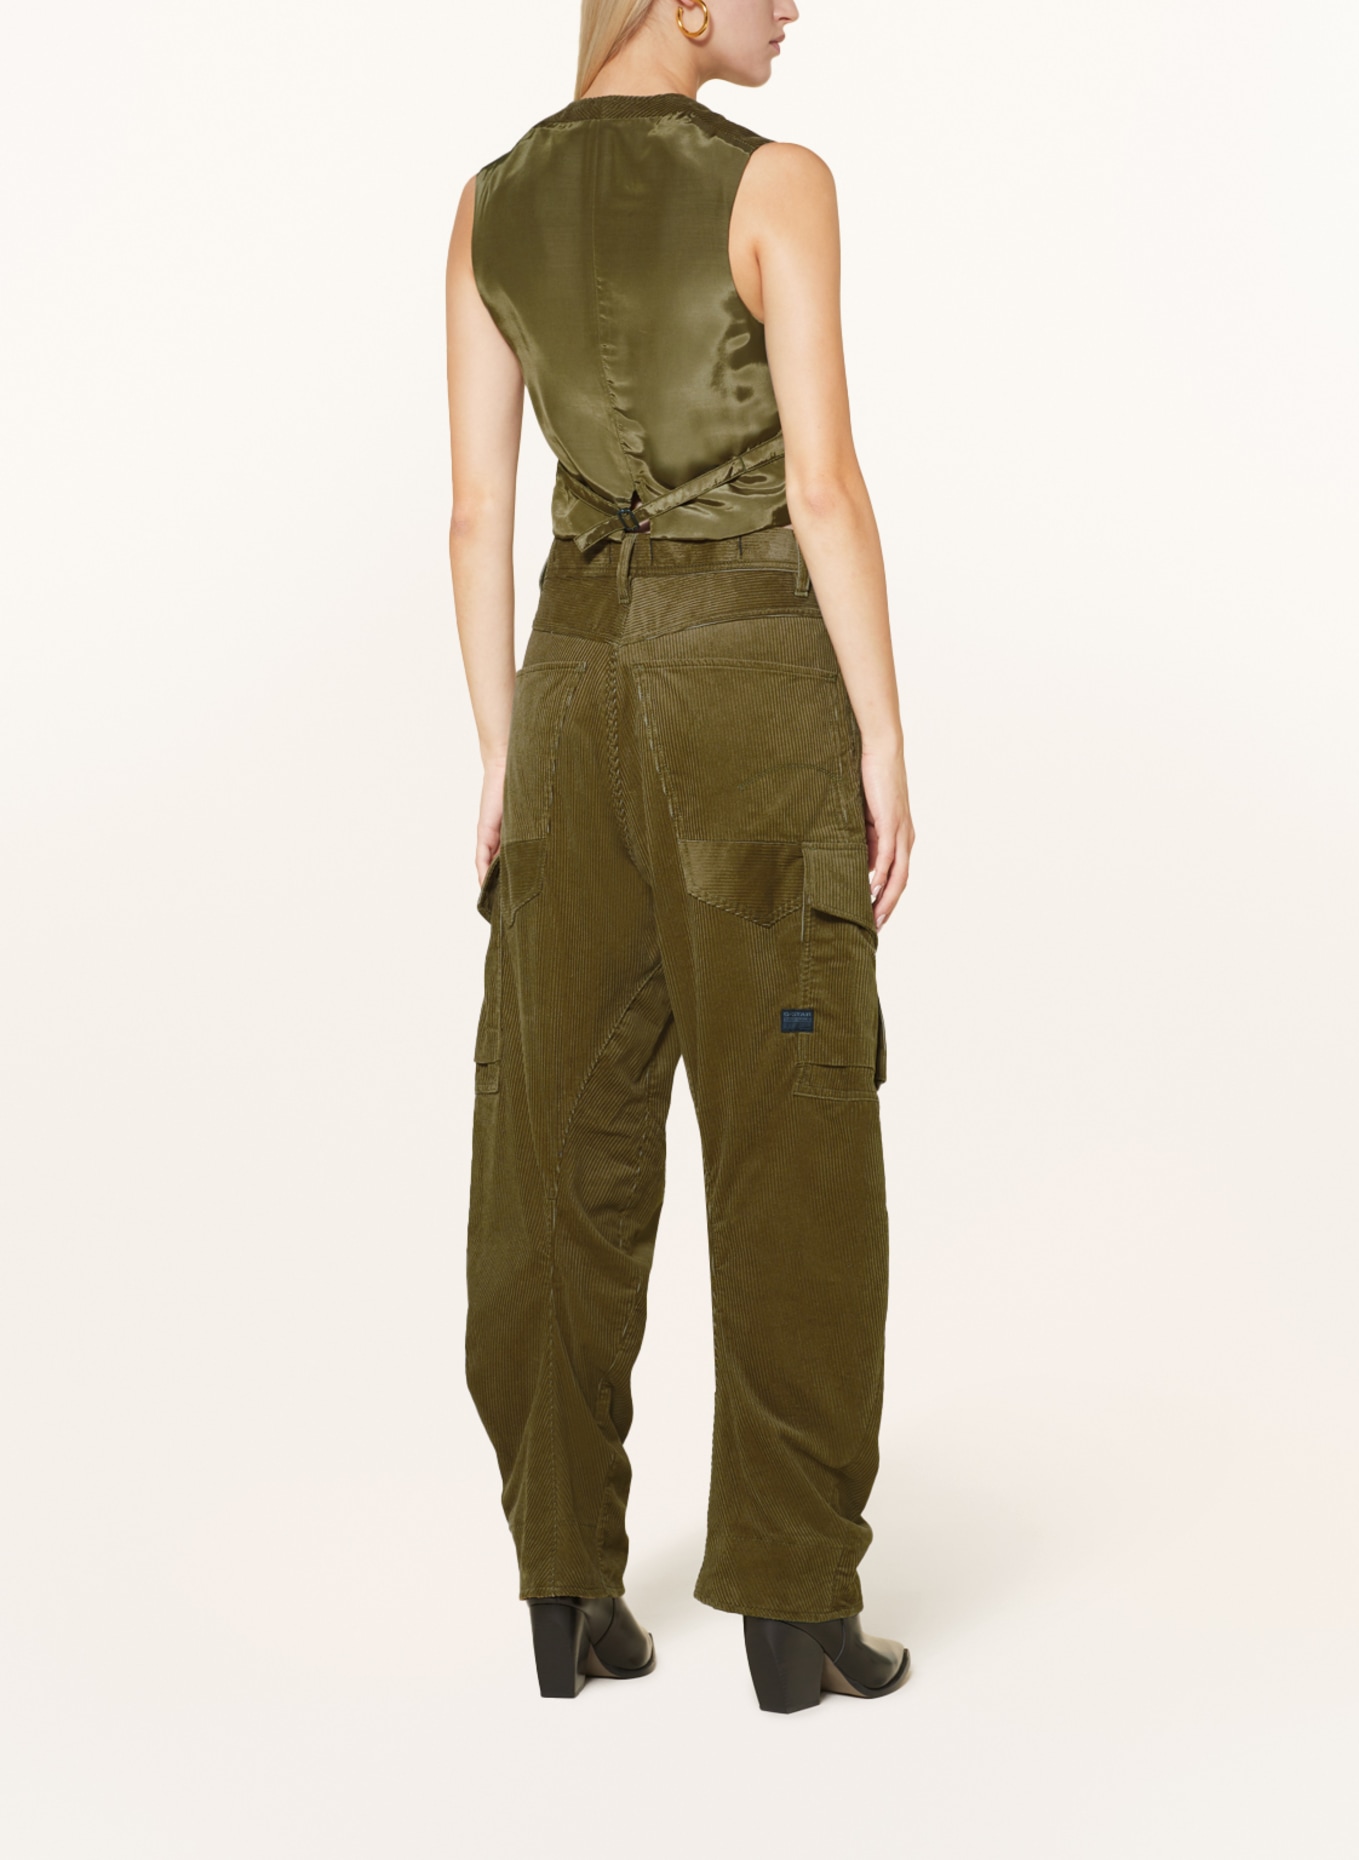 G-Star RAW Blazer vest in mixed materials, Color: OLIVE (Image 3)